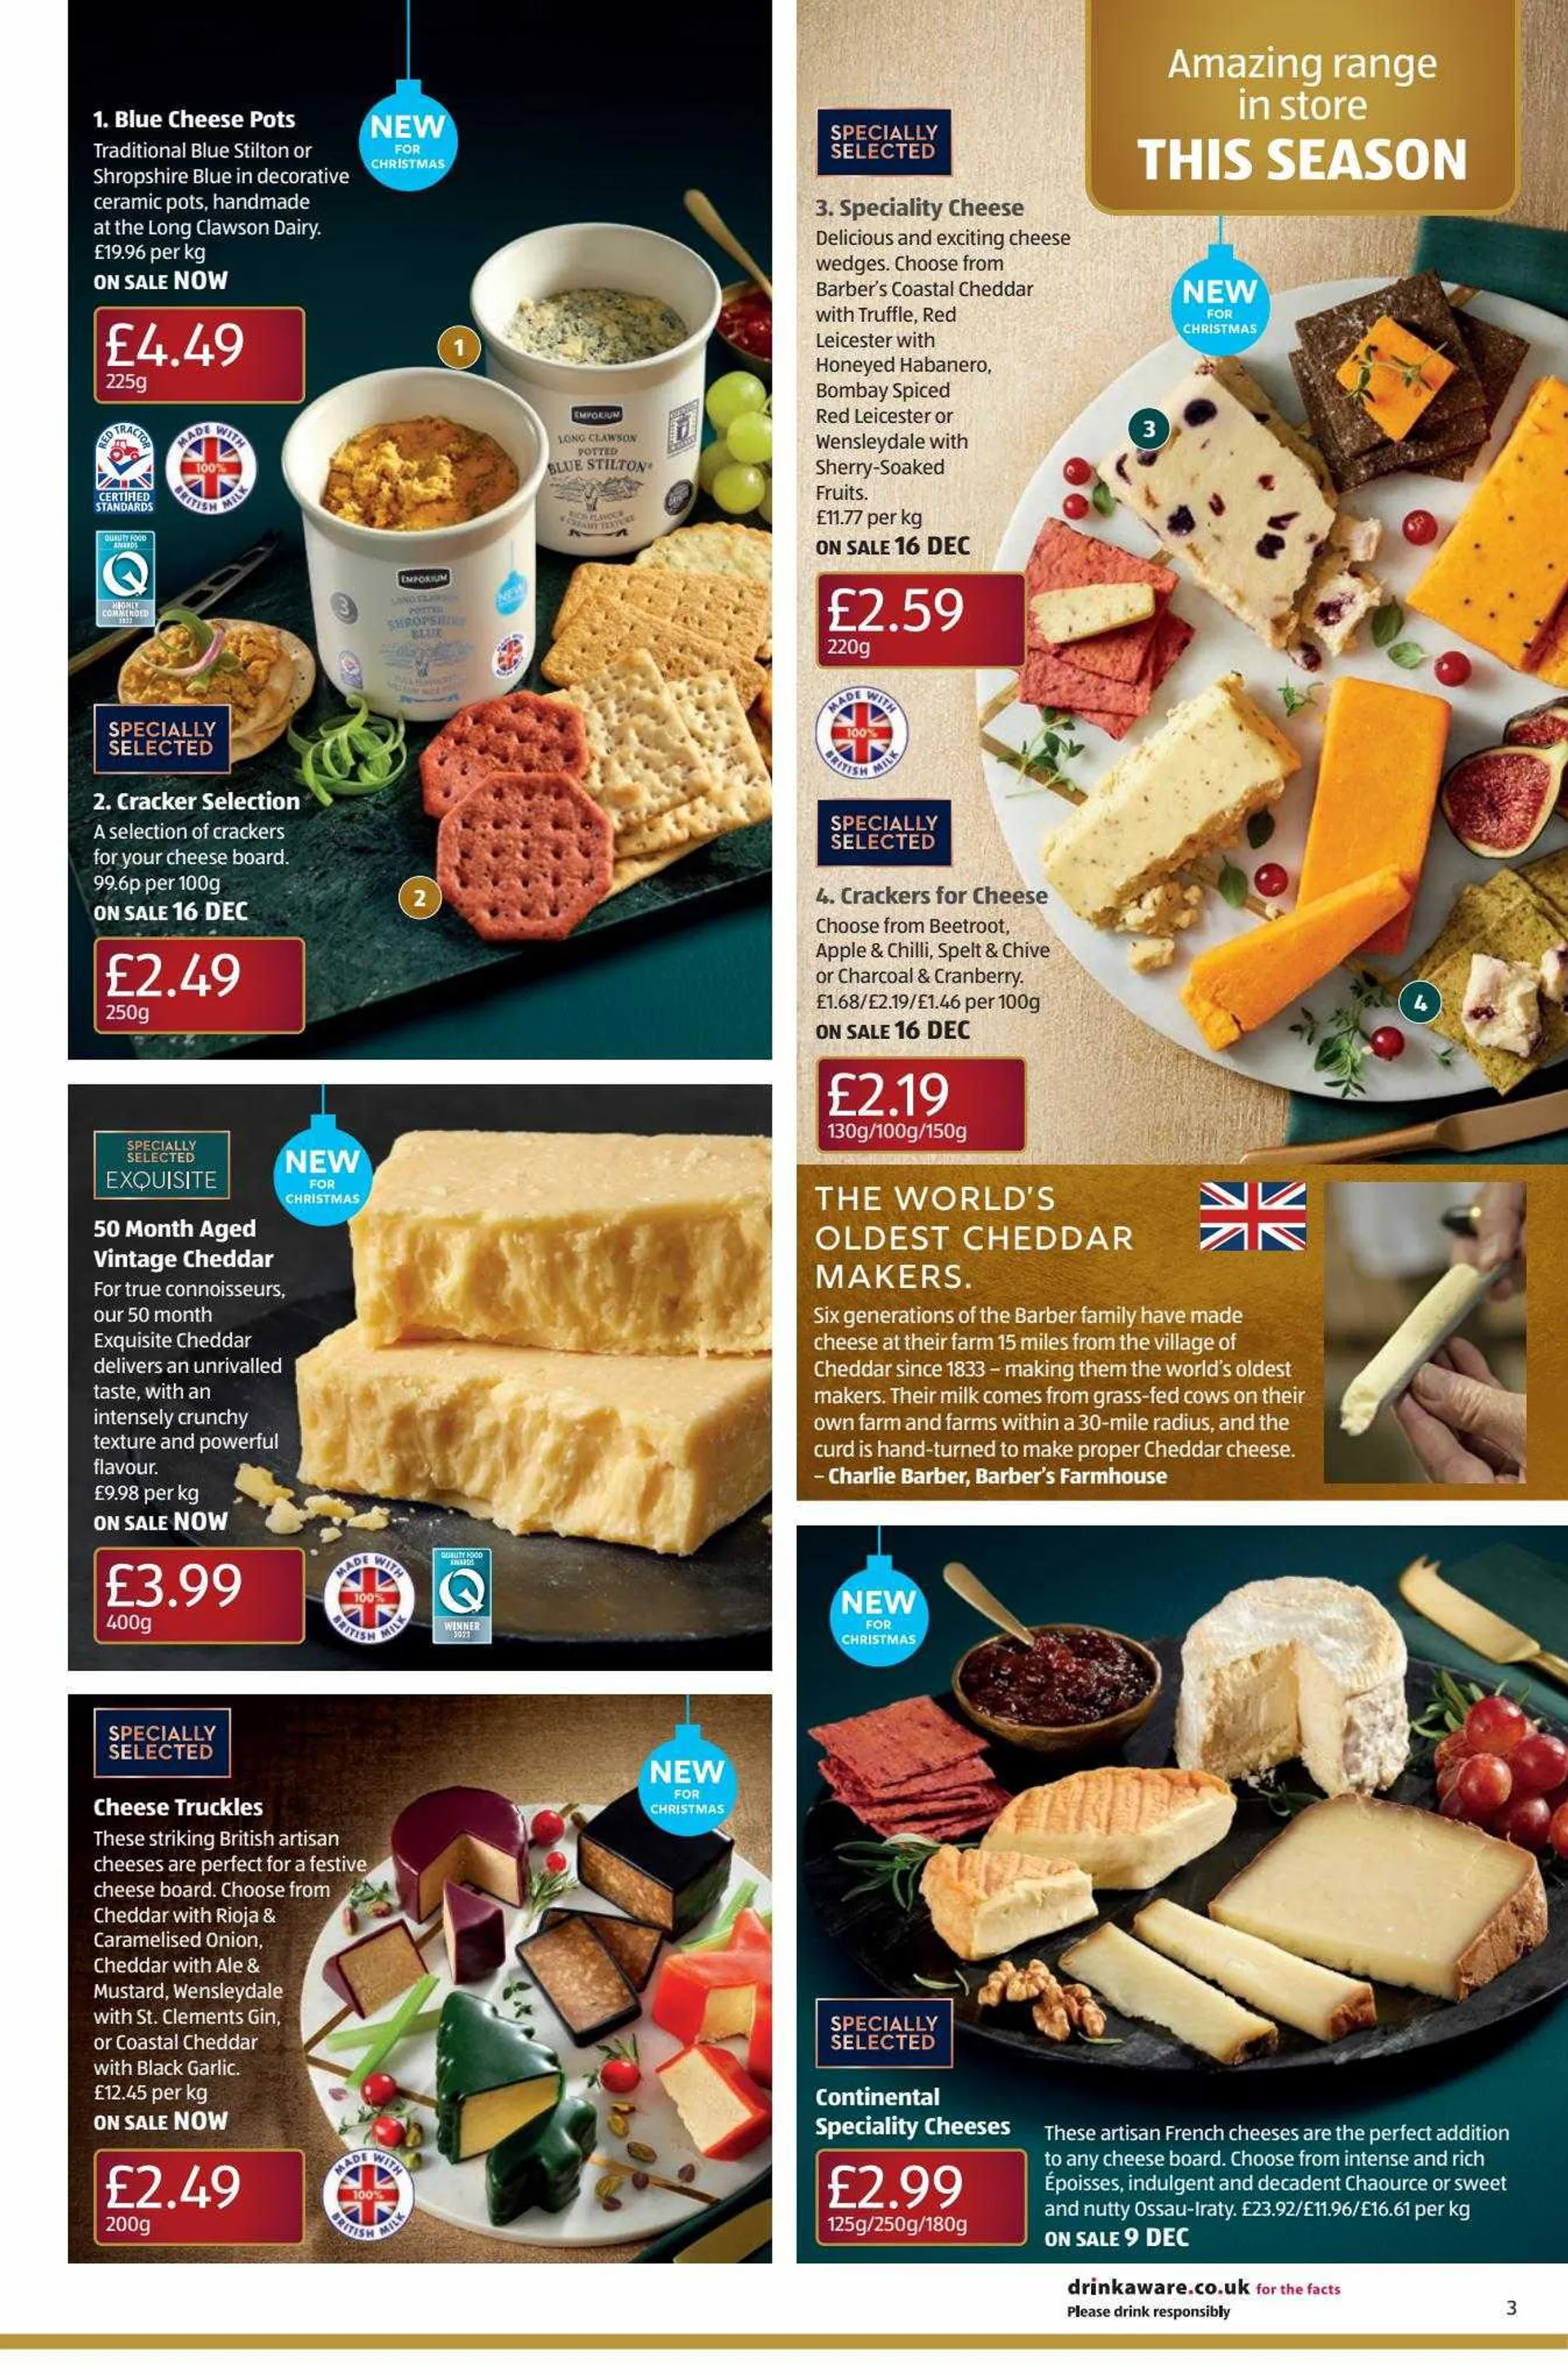 Aldi Weekly Offers - 3